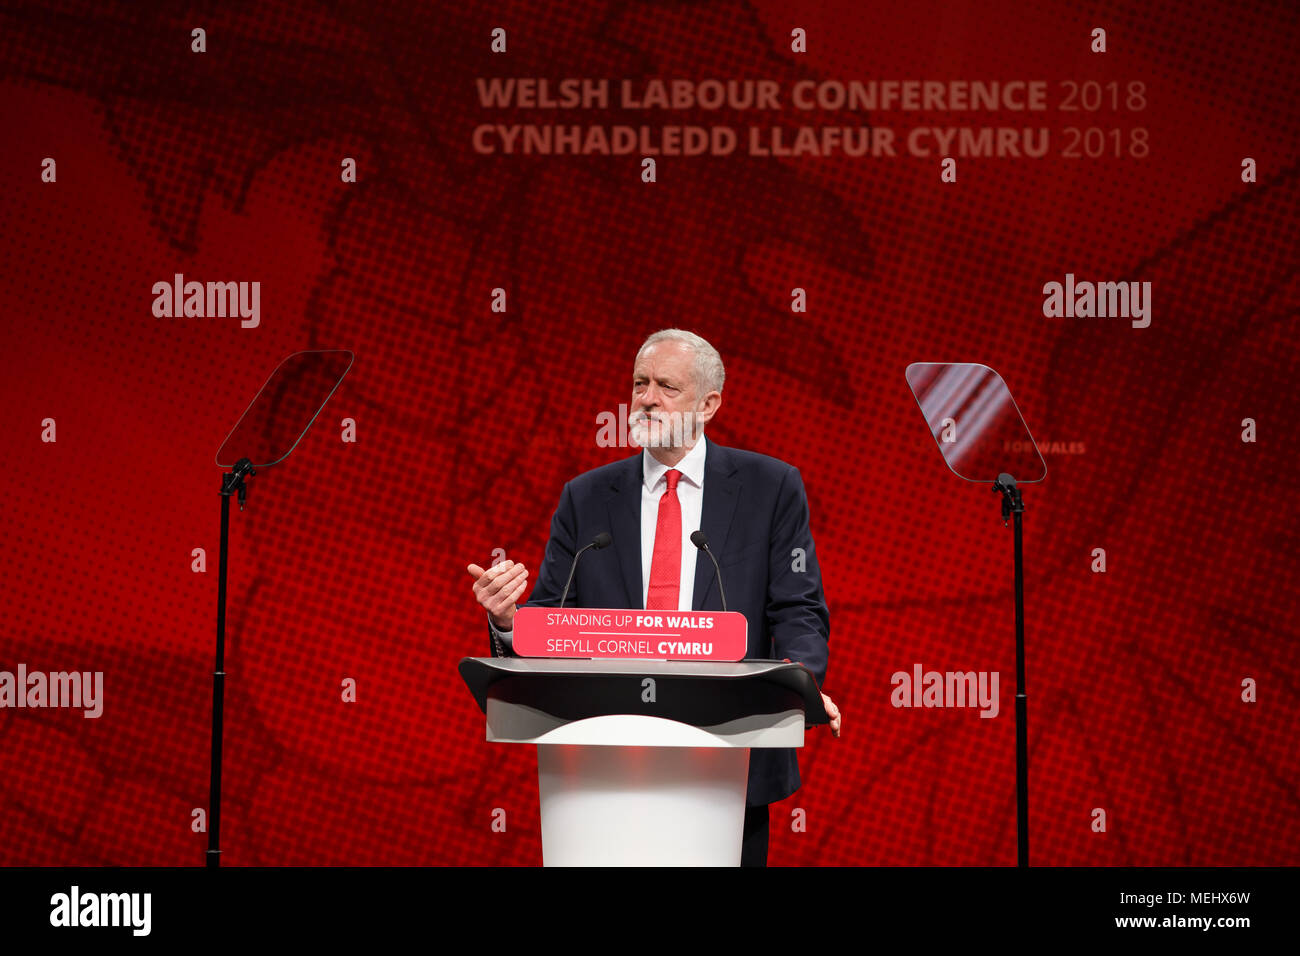 Welsh Labour Conference, Llandudno, UK, 22 April 2018. Jeremy Corbyn - Leader of Labour Party Speech to conference. Credit: Sean Pursey/Alamy Live News Stock Photo